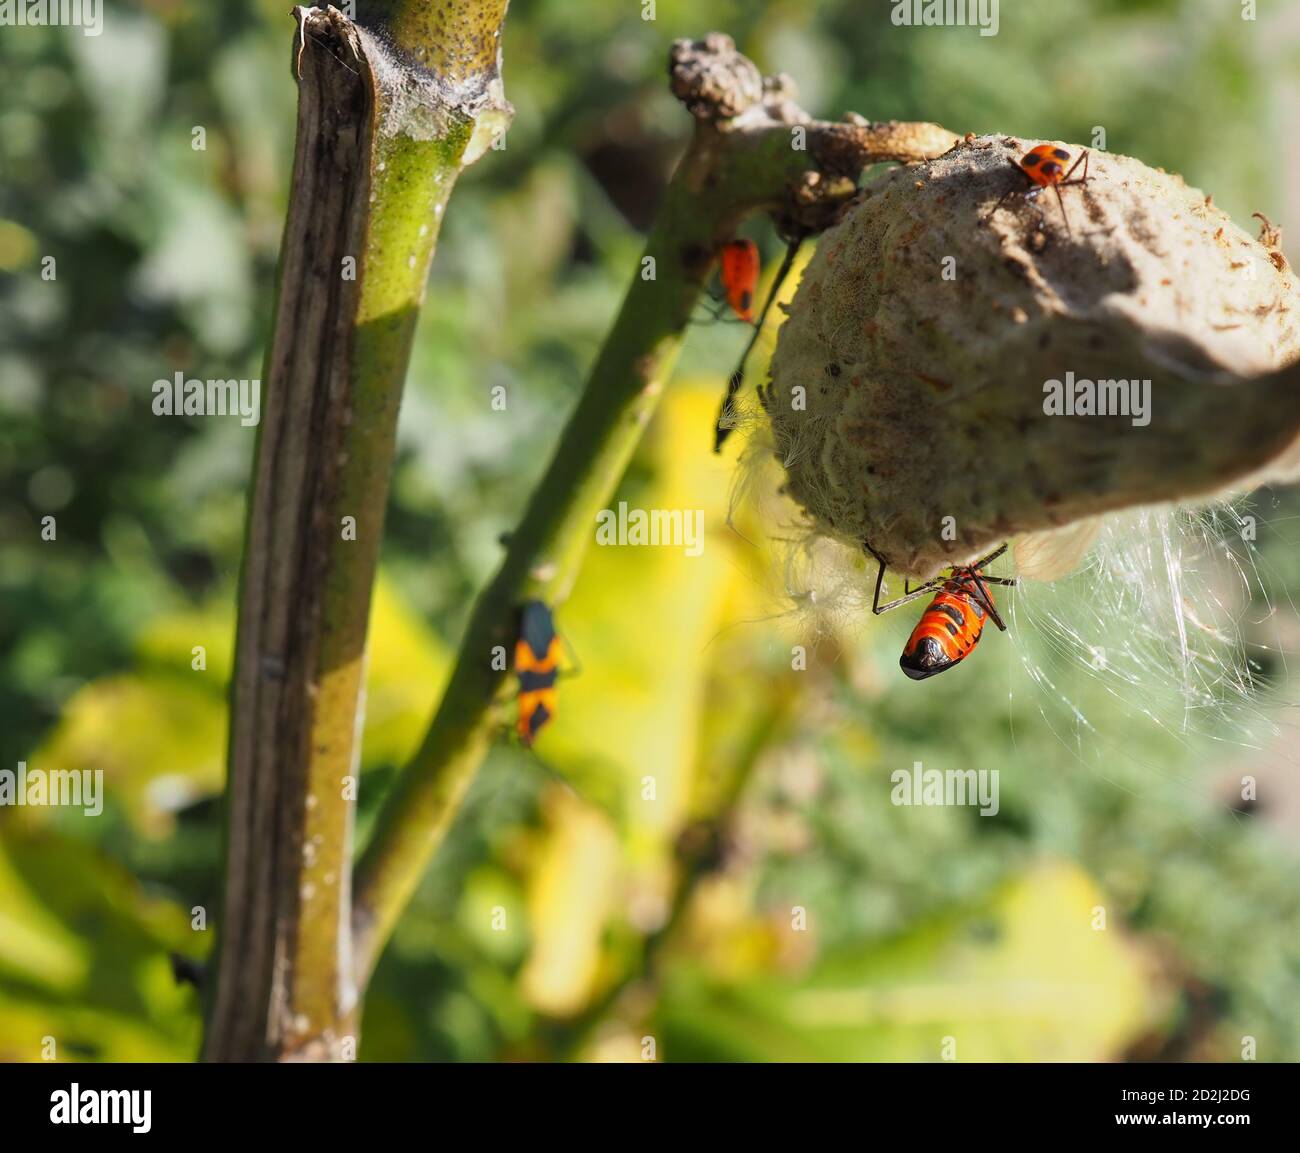 The abdomen of a female Large Milkweed Bug, hanging out in the silky floss threads underneath a drying brown Milkweed pod. Stock Photo